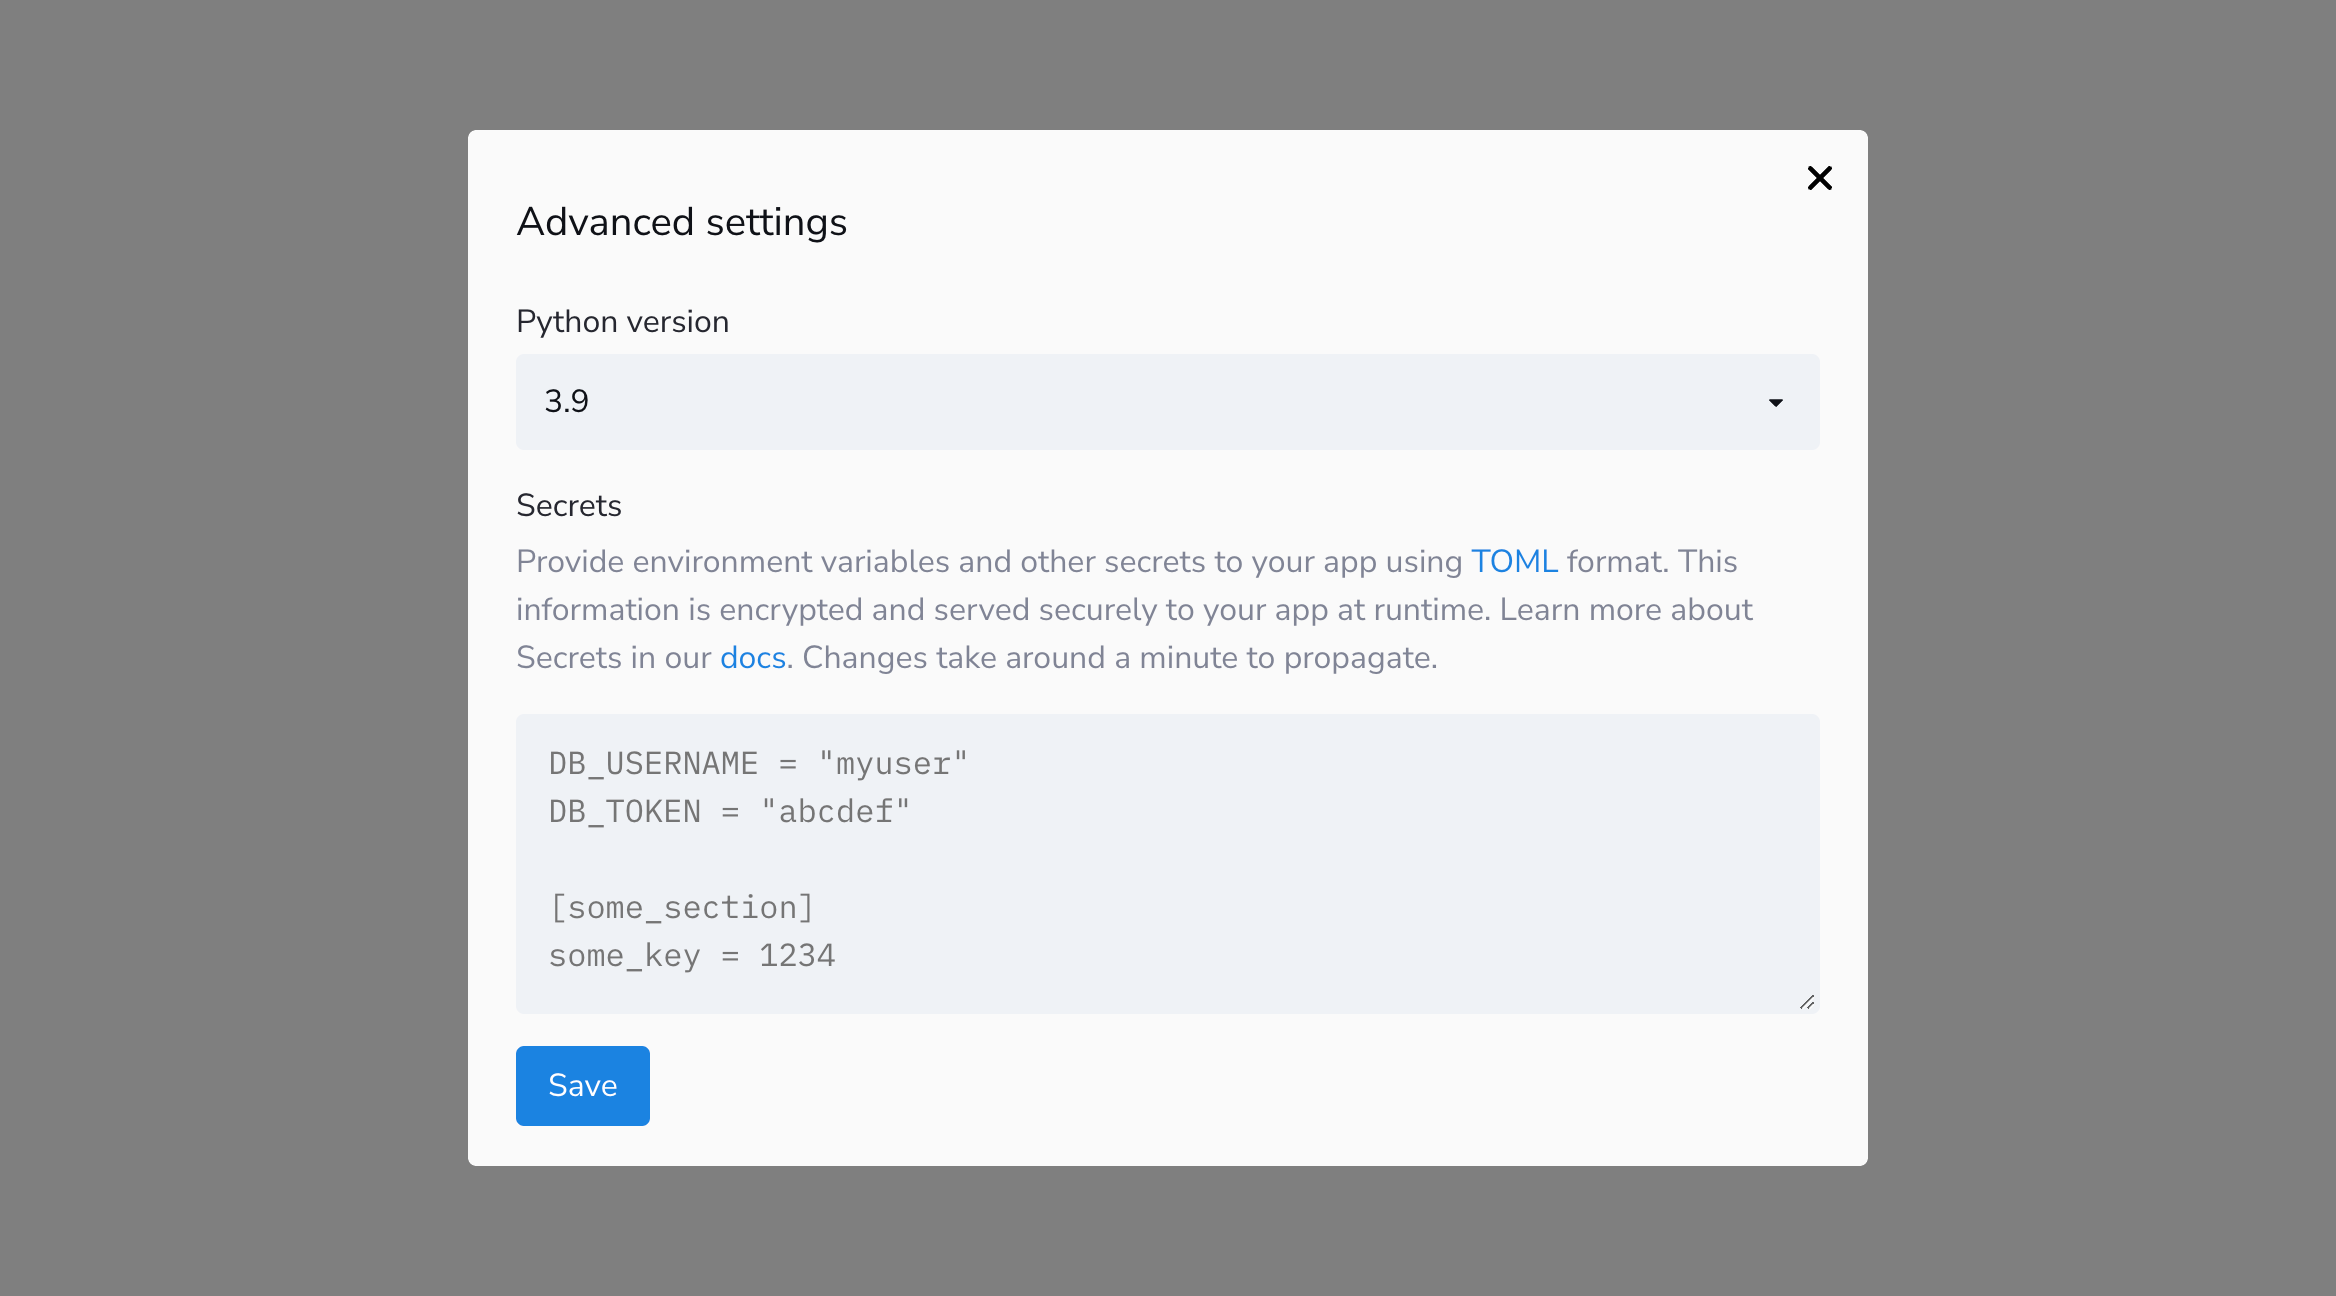 Advanced settings for deploying your app